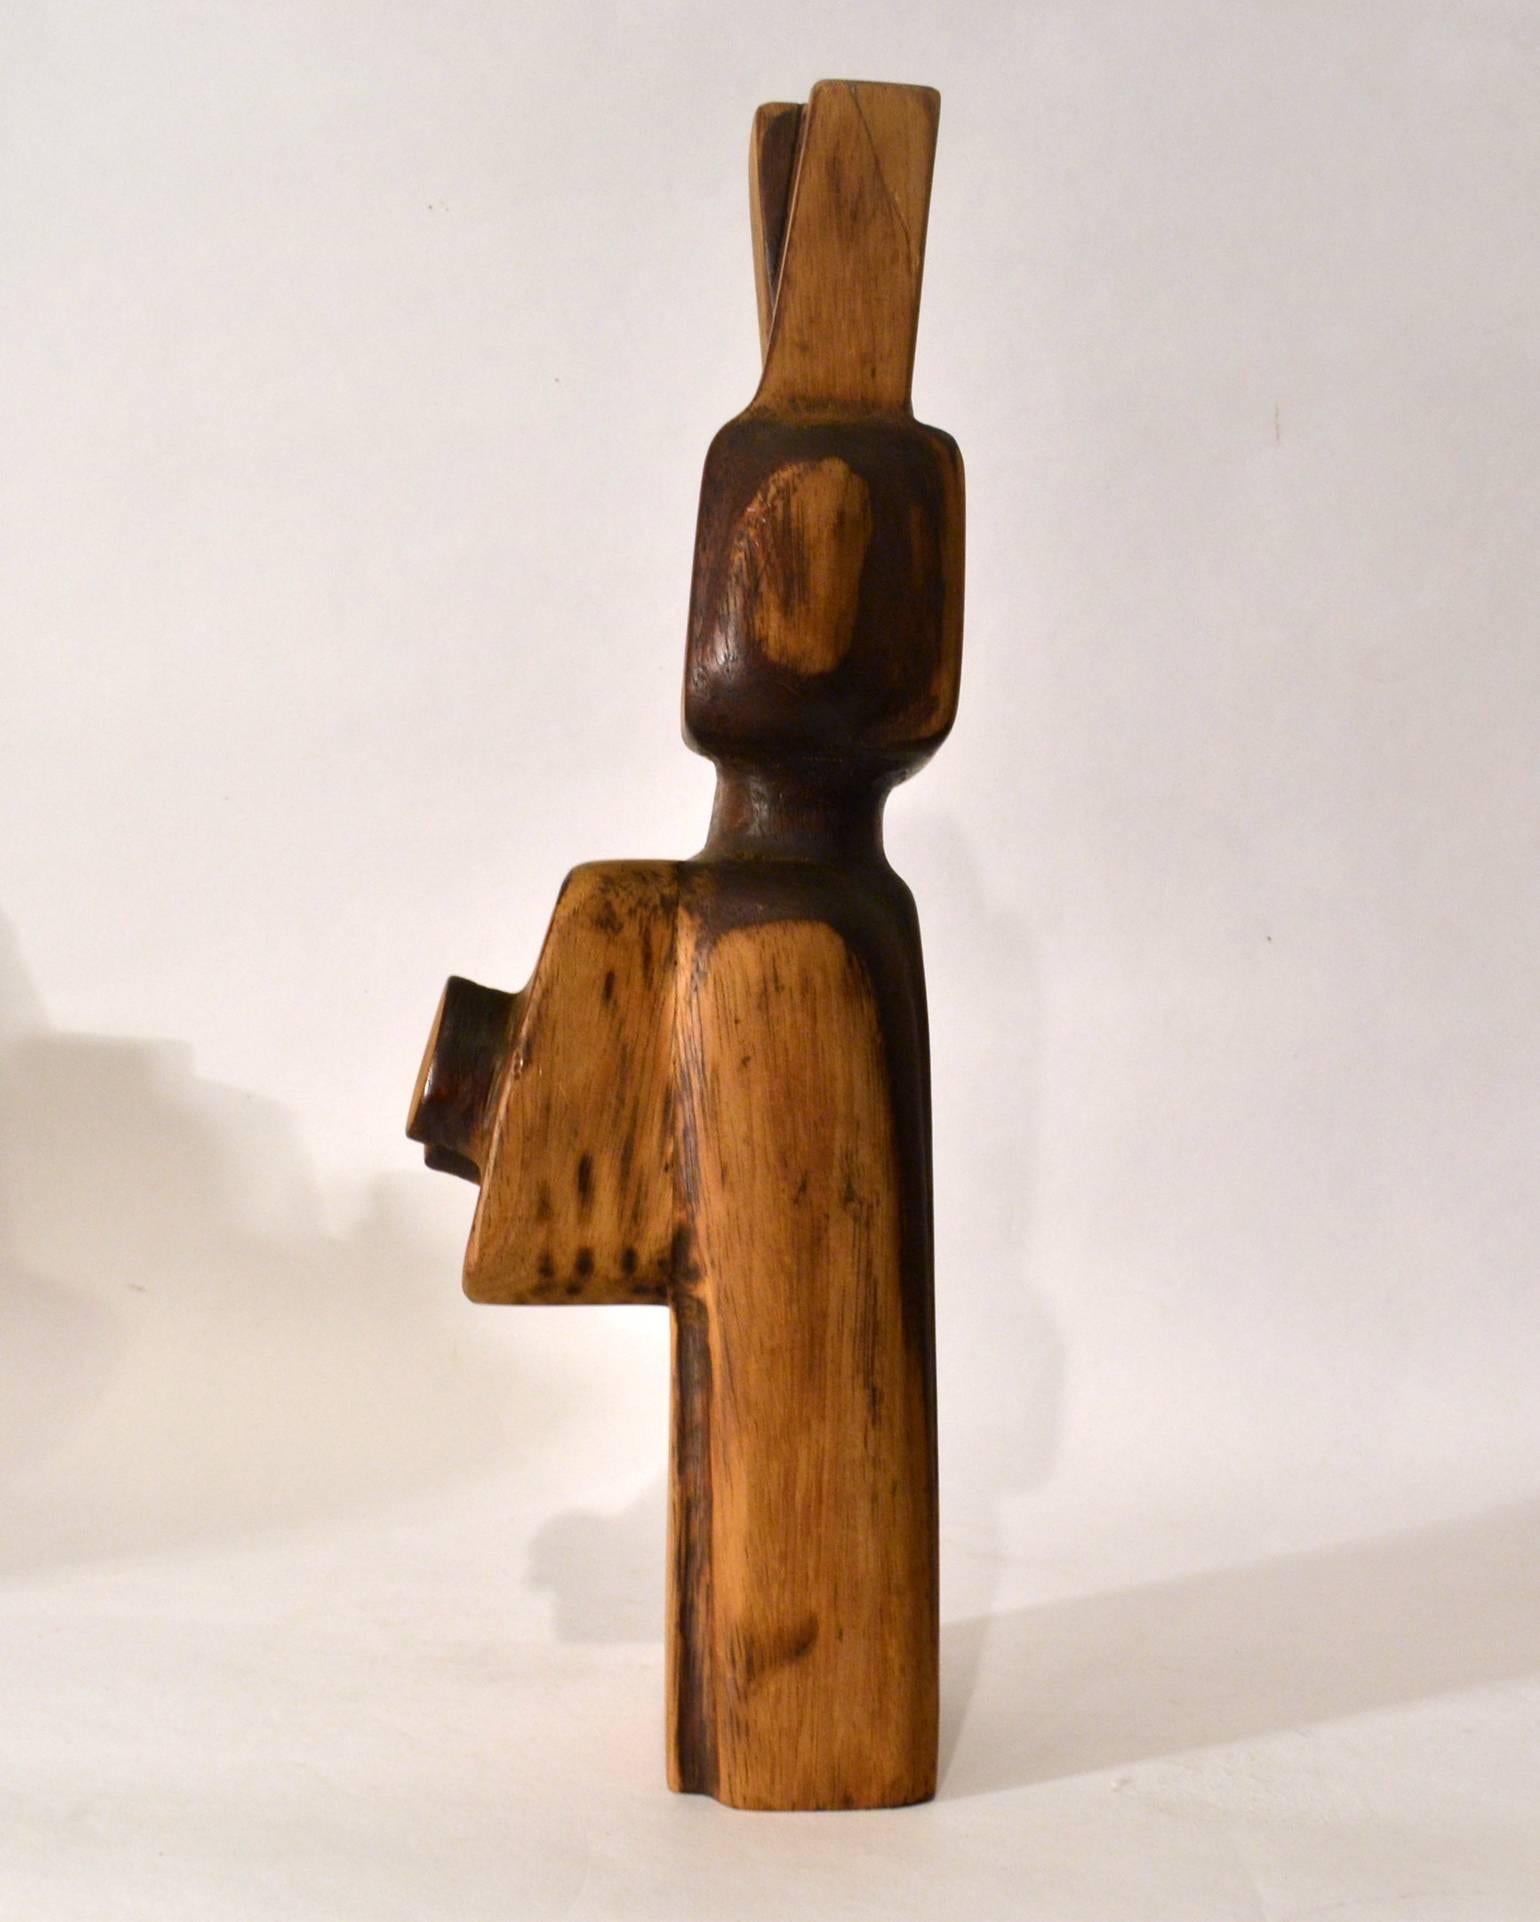 Abstract female figure carved in wood and part coloured. The sculpture is inspired by the African art and Cubist artist like Picasso in the 1920s and made in 1978 by the Dutch sculptor and teacher Bert van Beek (1946), working in Rotterdam.
 